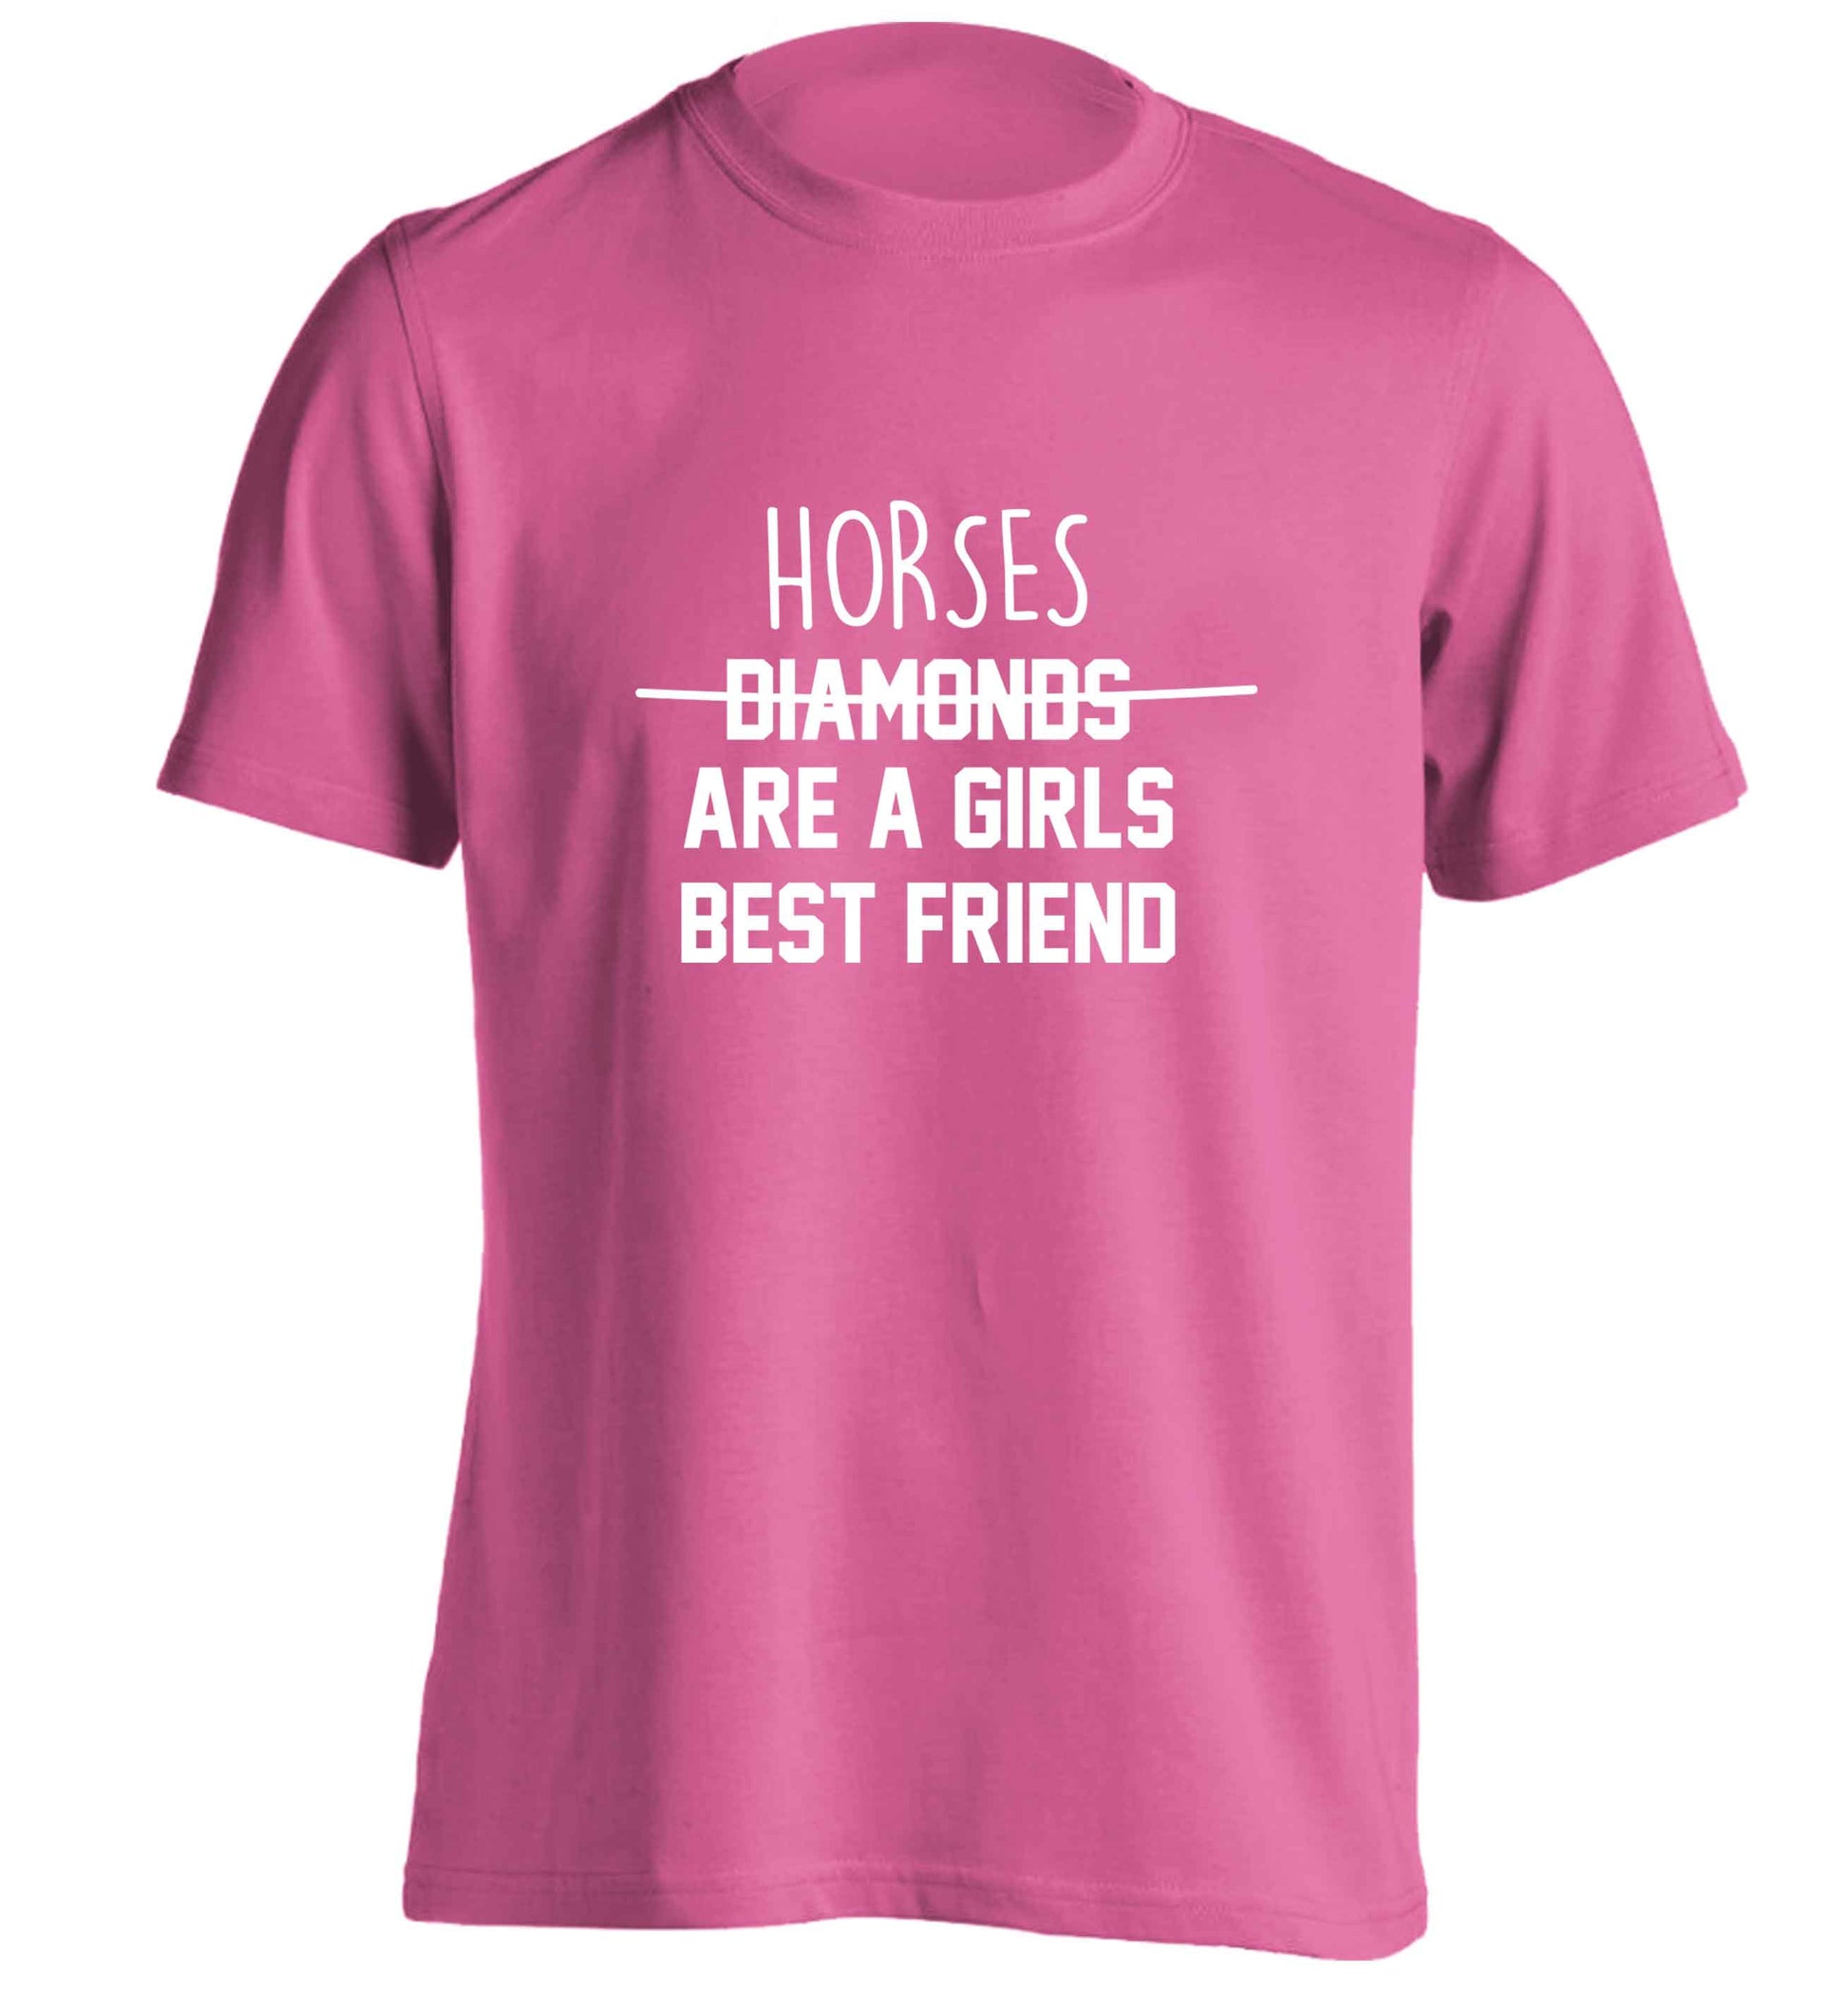 Horses are a girls best friend adults unisex pink Tshirt 2XL